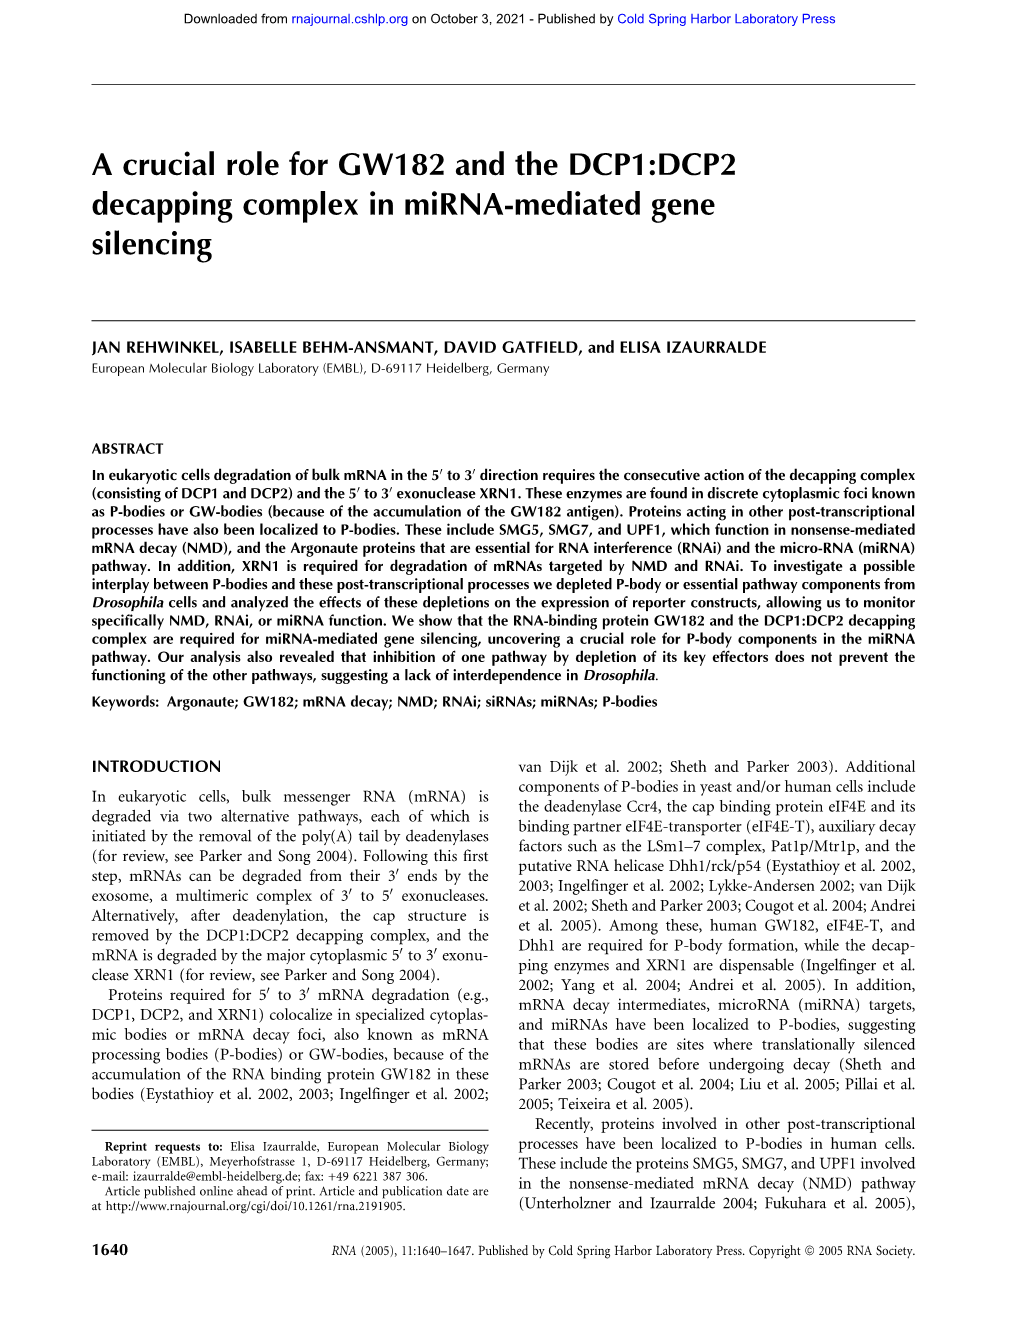 A Crucial Role for GW182 and the DCP1:DCP2 Decapping Complex in Mirna-Mediated Gene Silencing